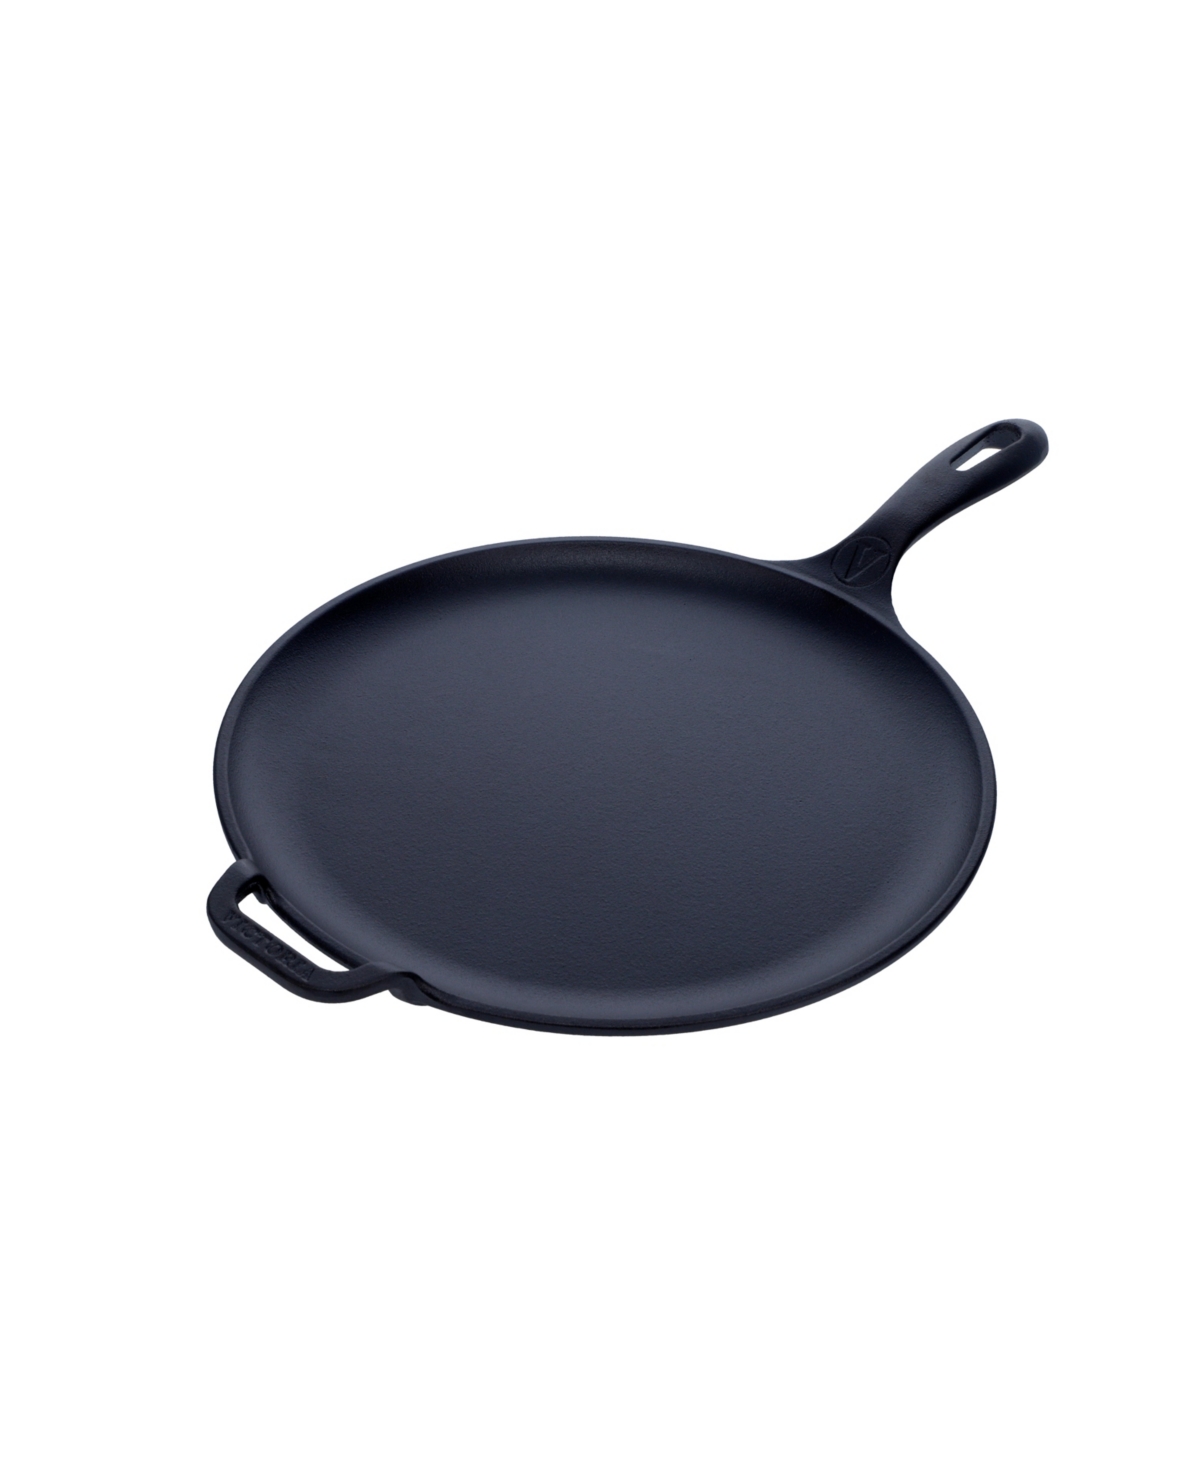 Victoria 12" Comal With Long Handle And Helper Handle, Seasoned In Black